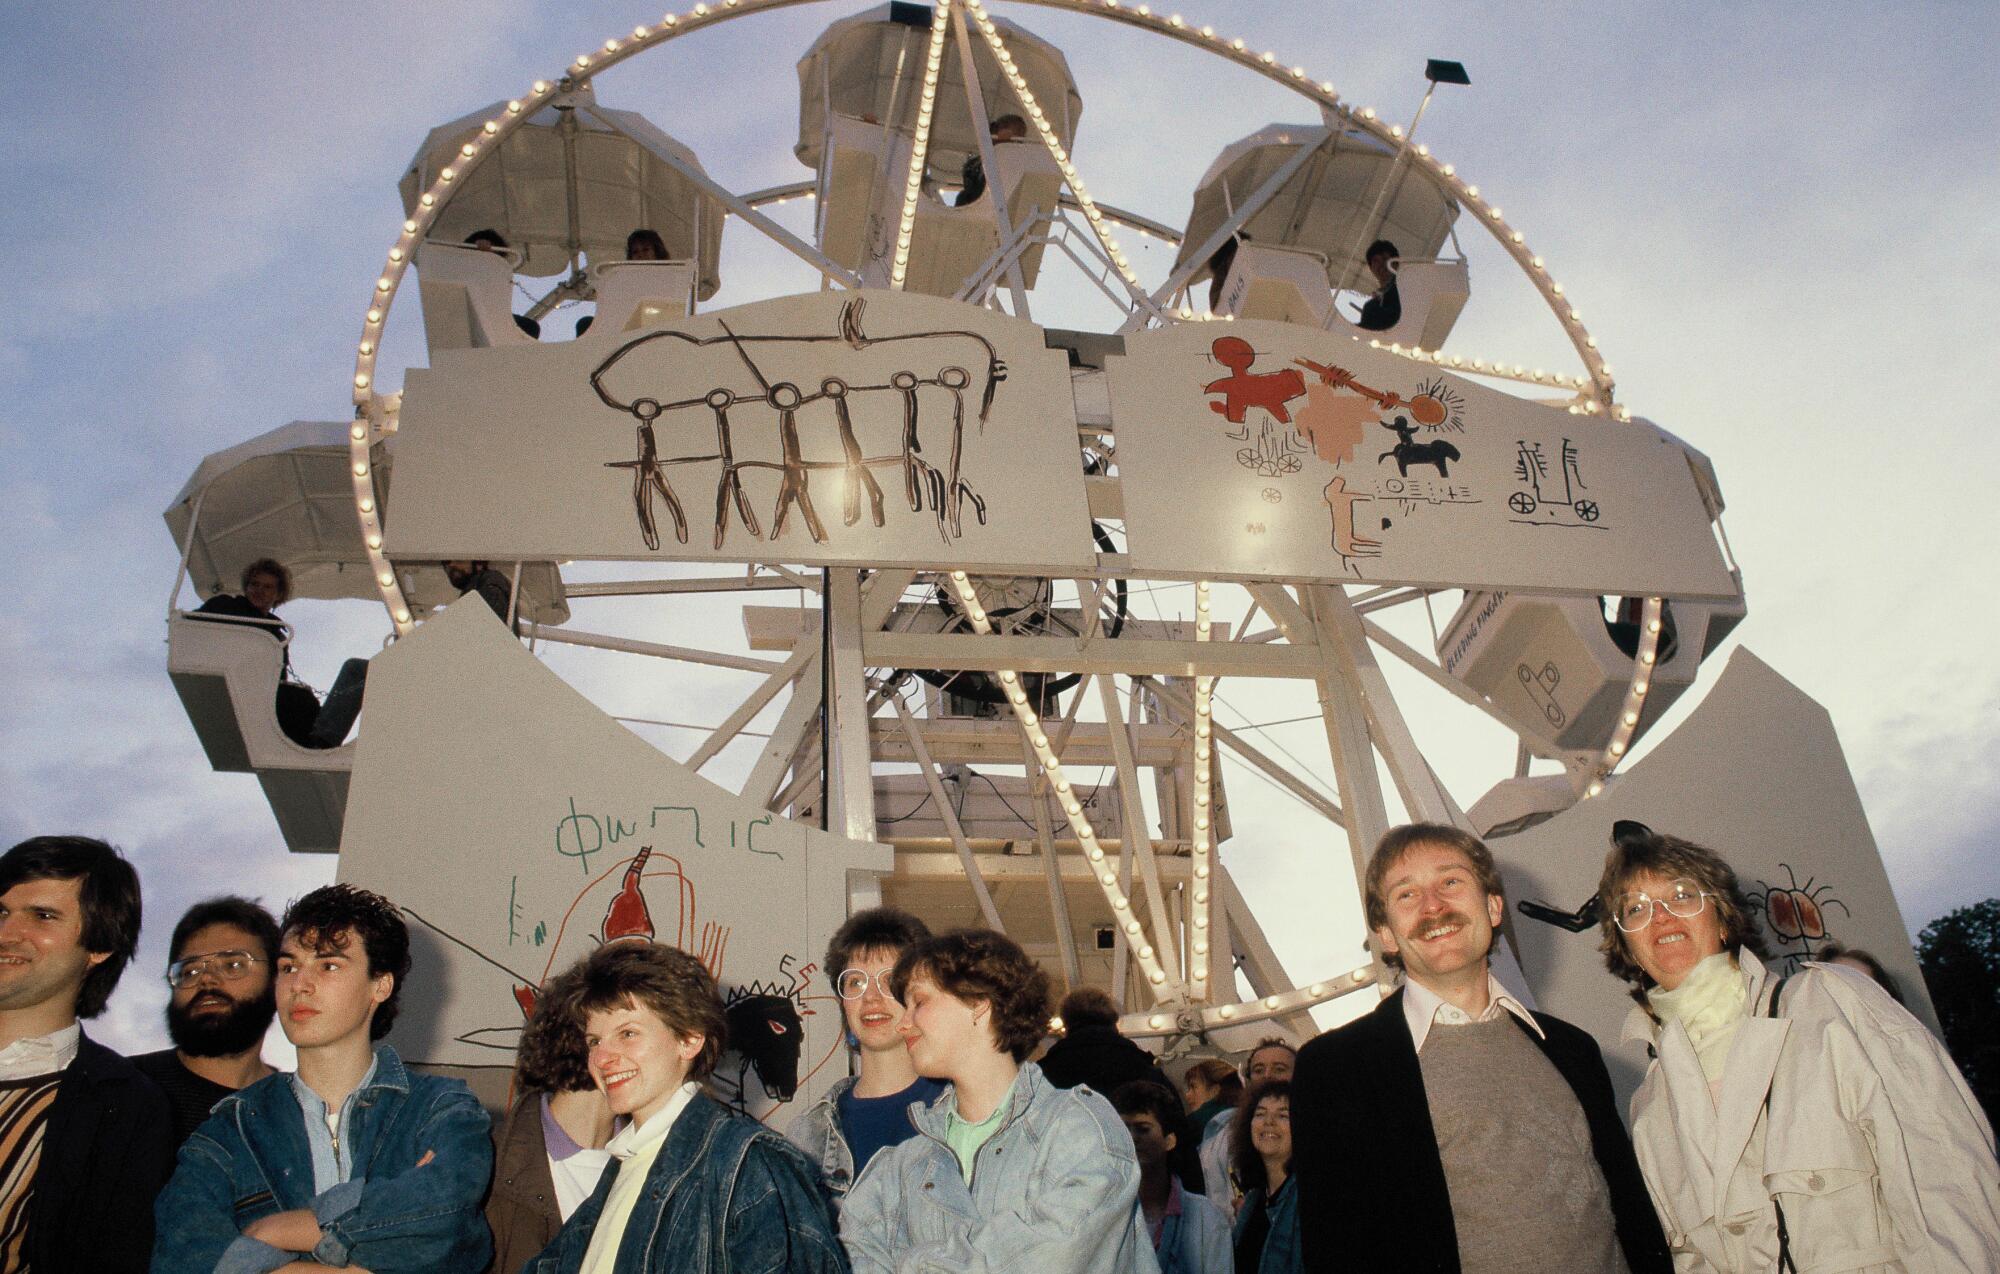  People on the ground in front of Jean-Michel Basquiat's Ferris wheel, which is adorned with the artist's sketches. 